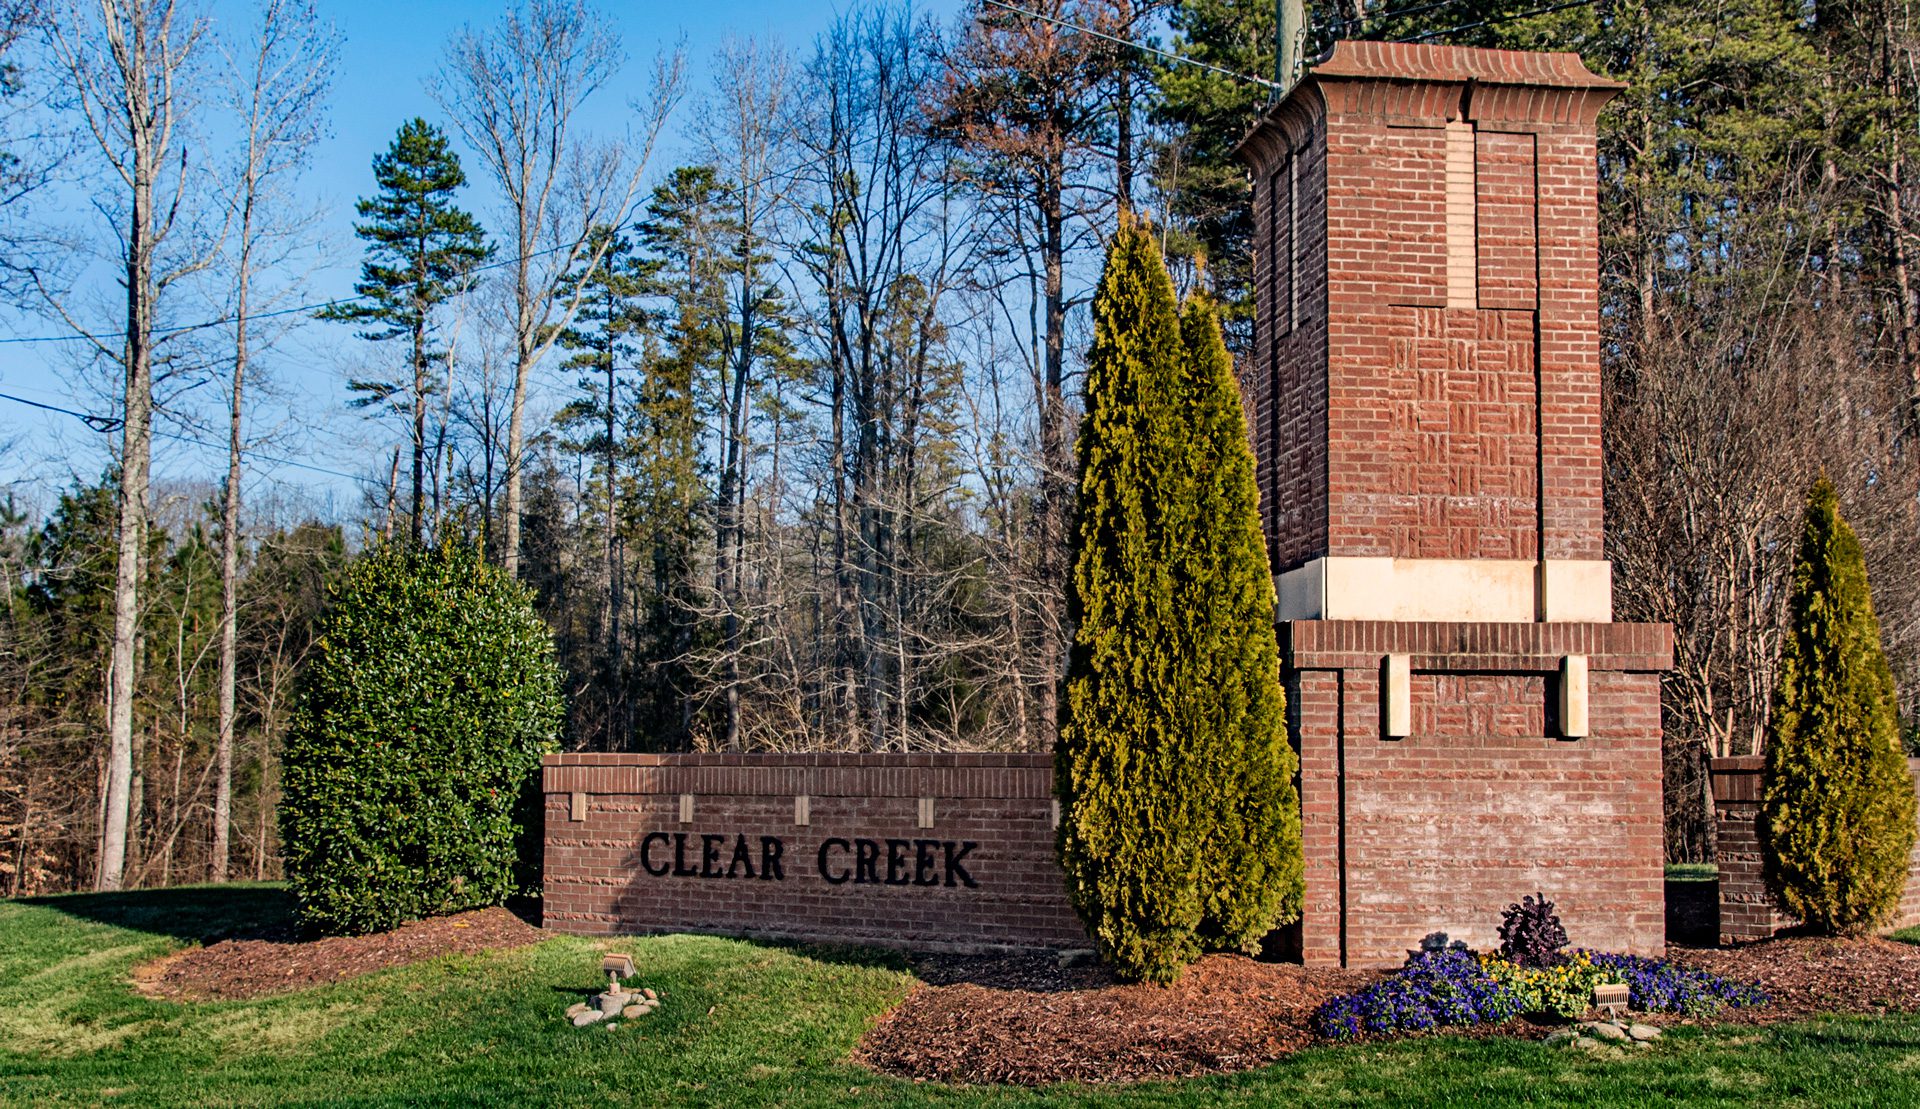 Clear Creek monument sign brick daytime